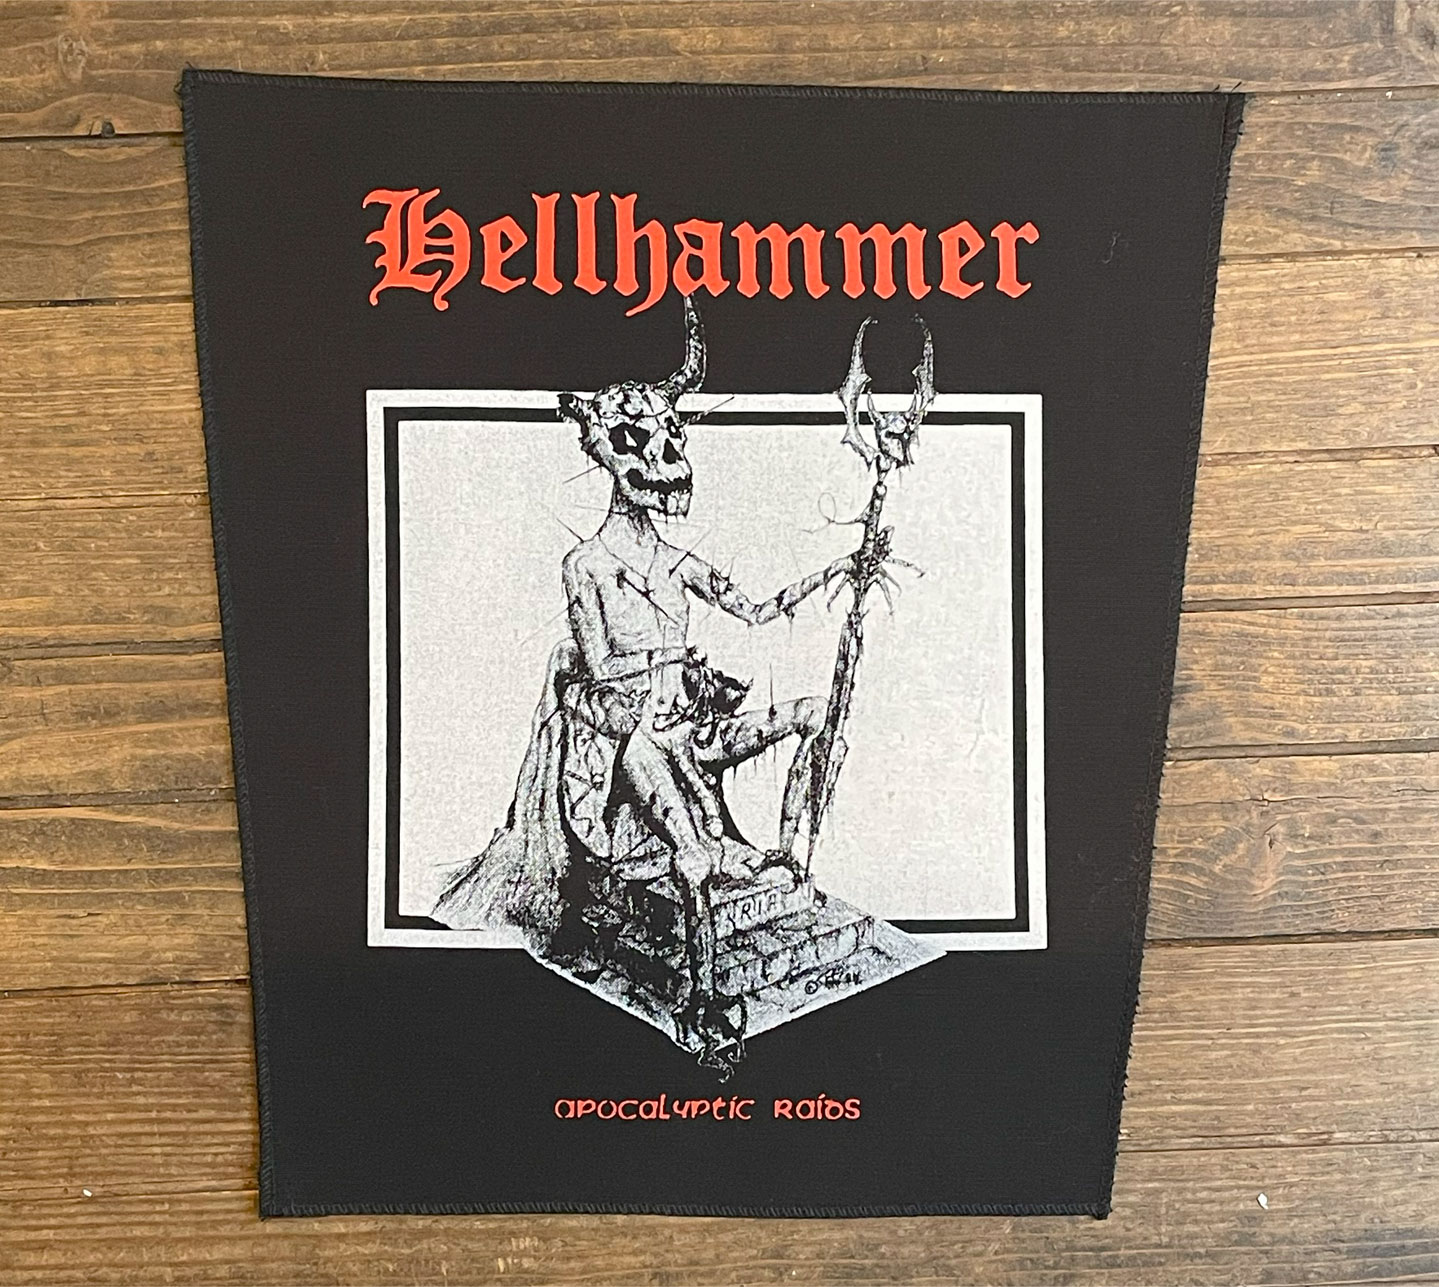 HELLHAMMER BACKPATCH APOCALYPTIC RAIDS